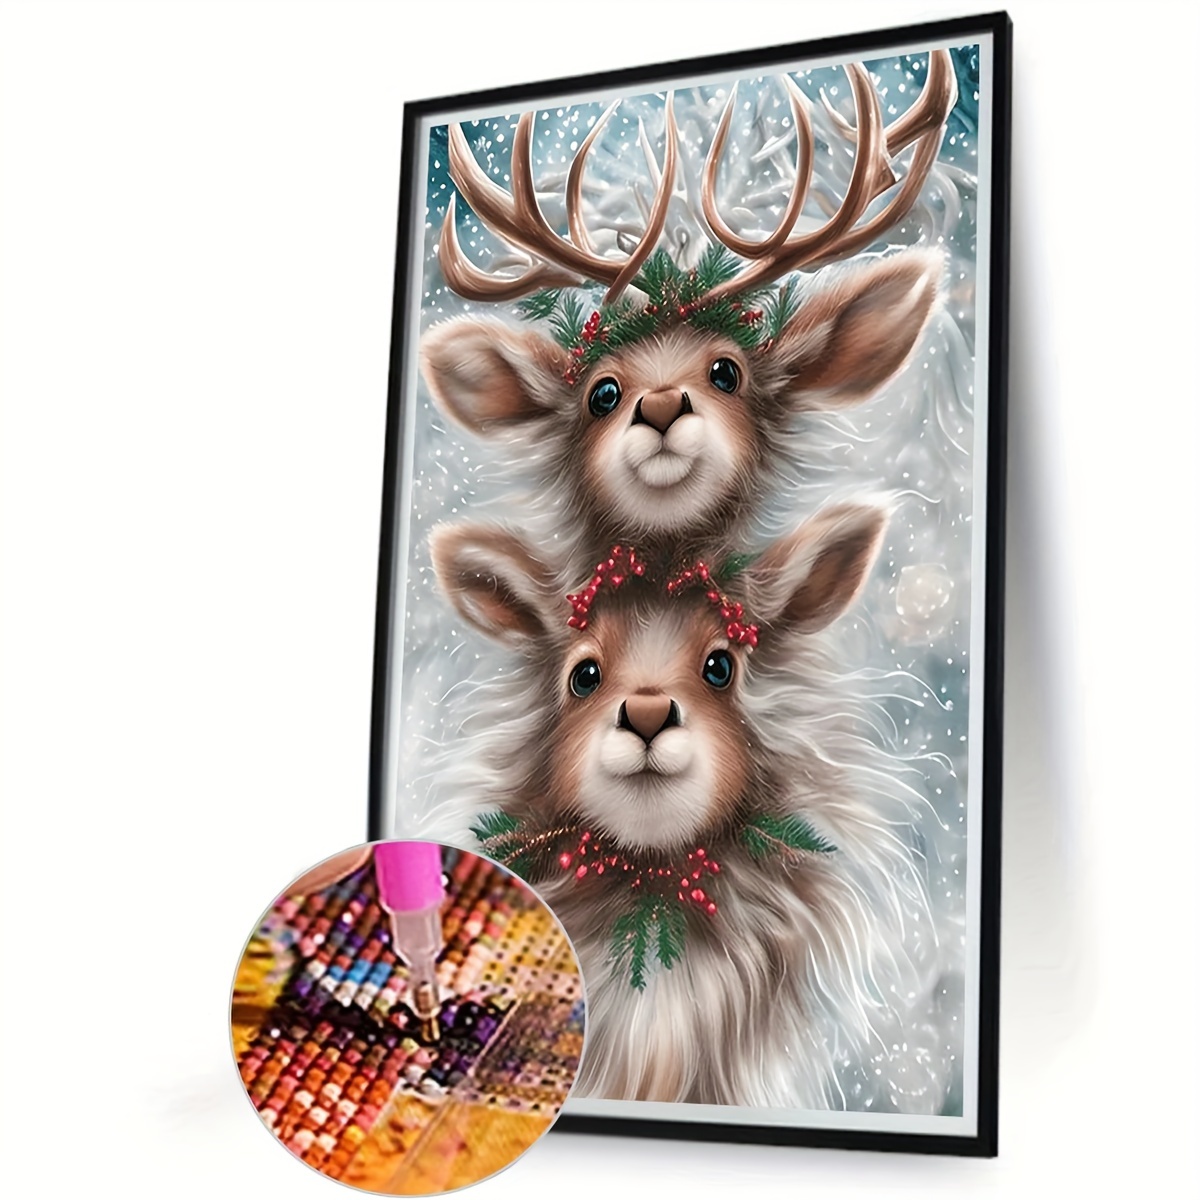 Maydear Small and Easy DIY 5d Diamond Painting Kits with Frame for Beginner  with White Frame for Kids 7×9 inch - (Christmas Brown Bear)